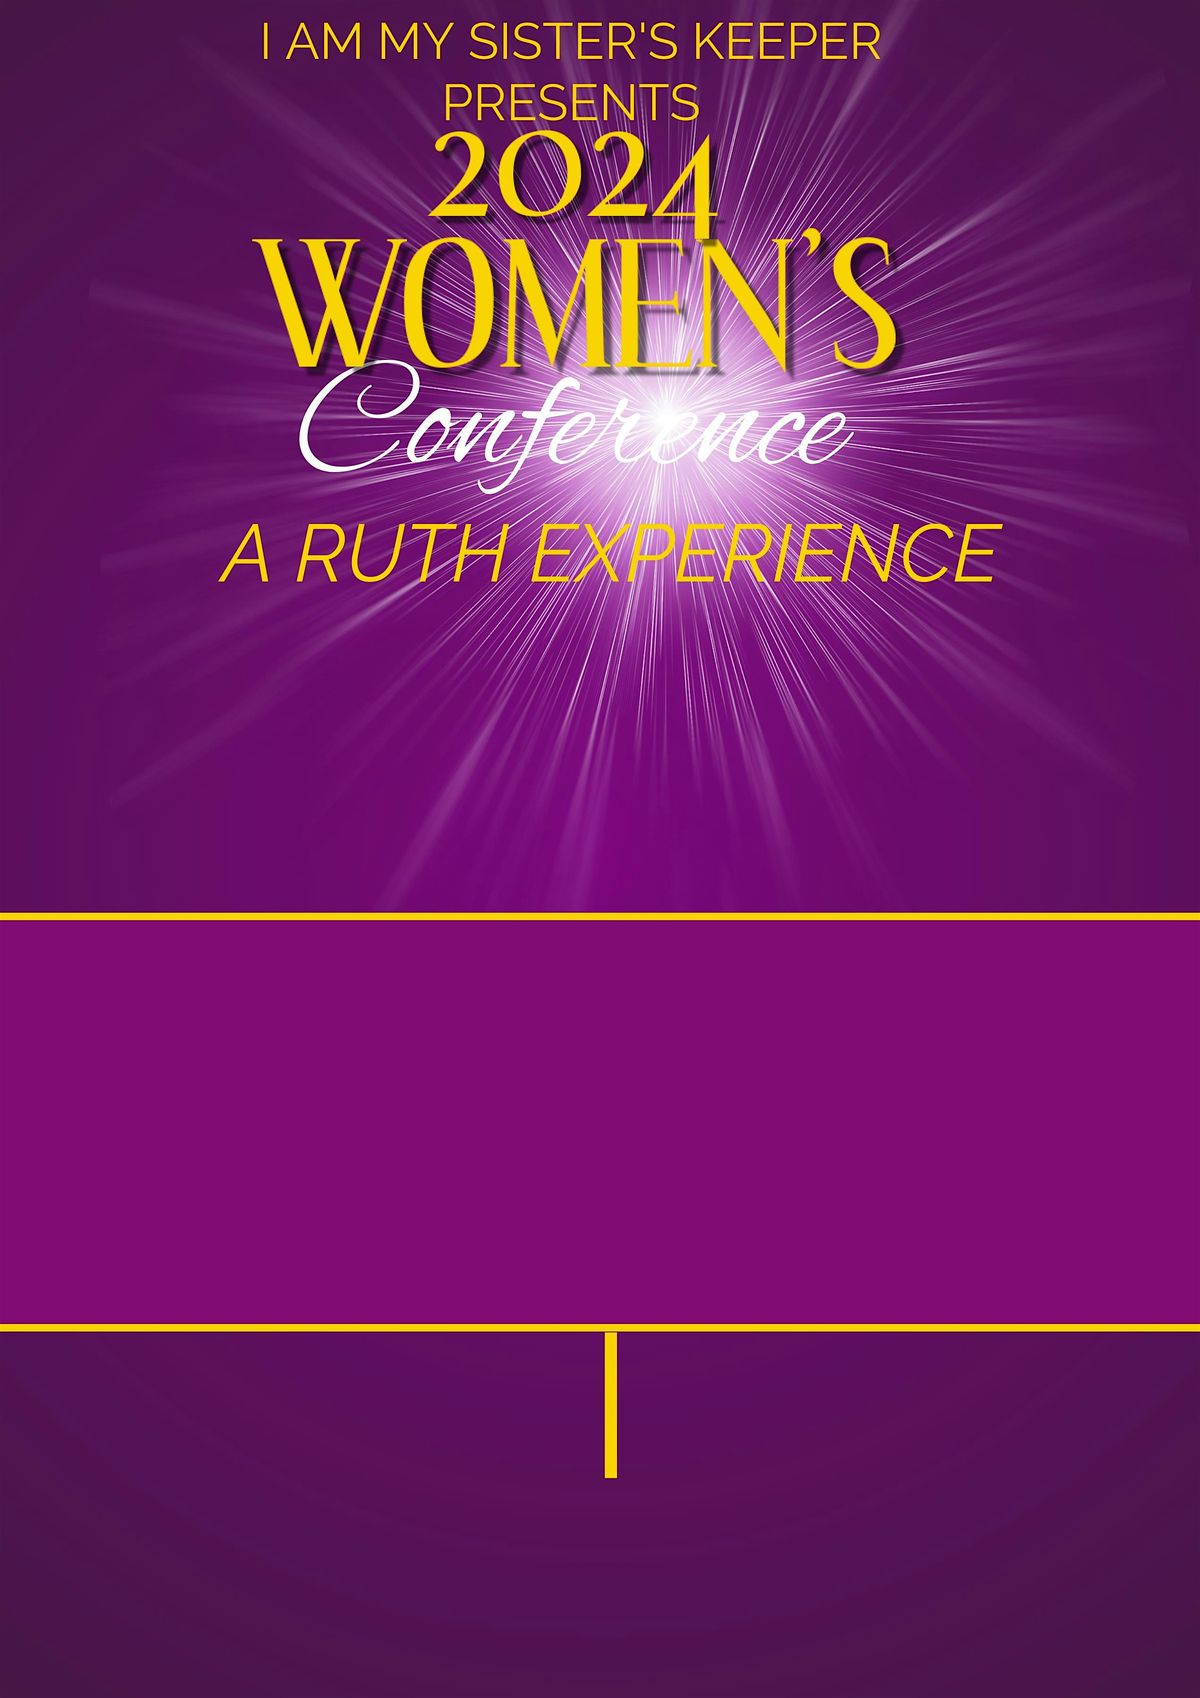 A Ruth Experience Women's Conference